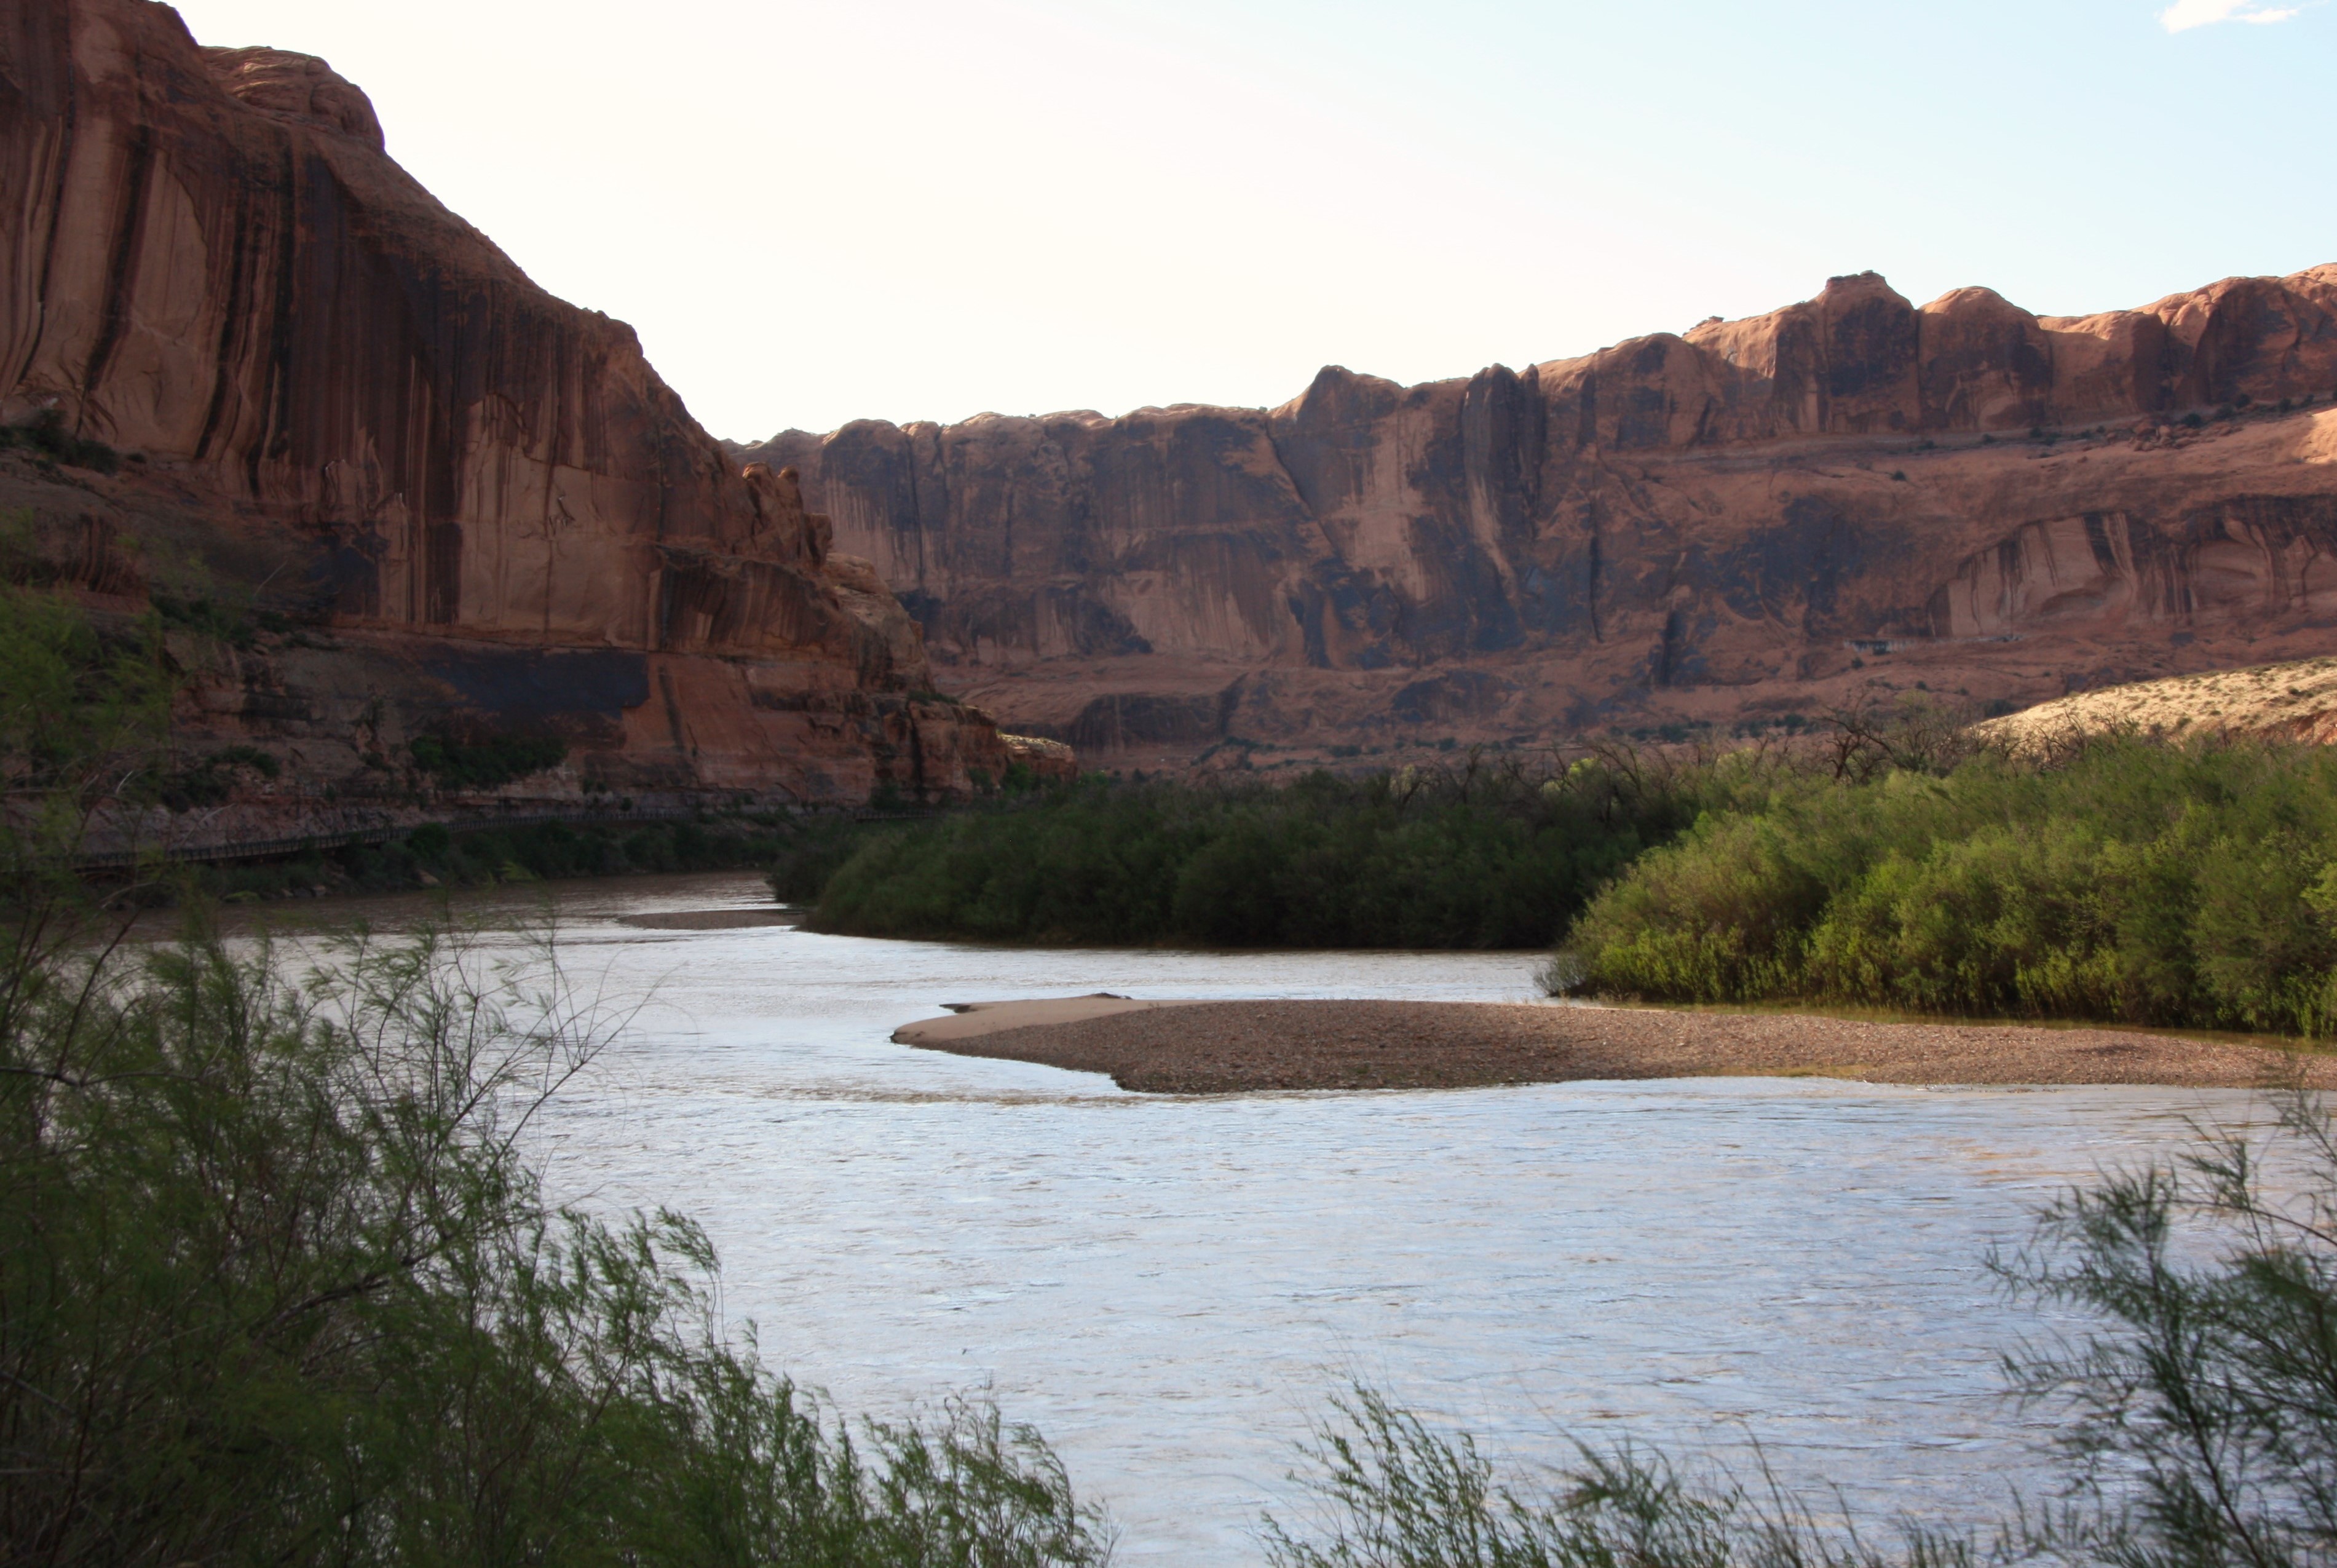 Flowing Colorado river in front of a plateau